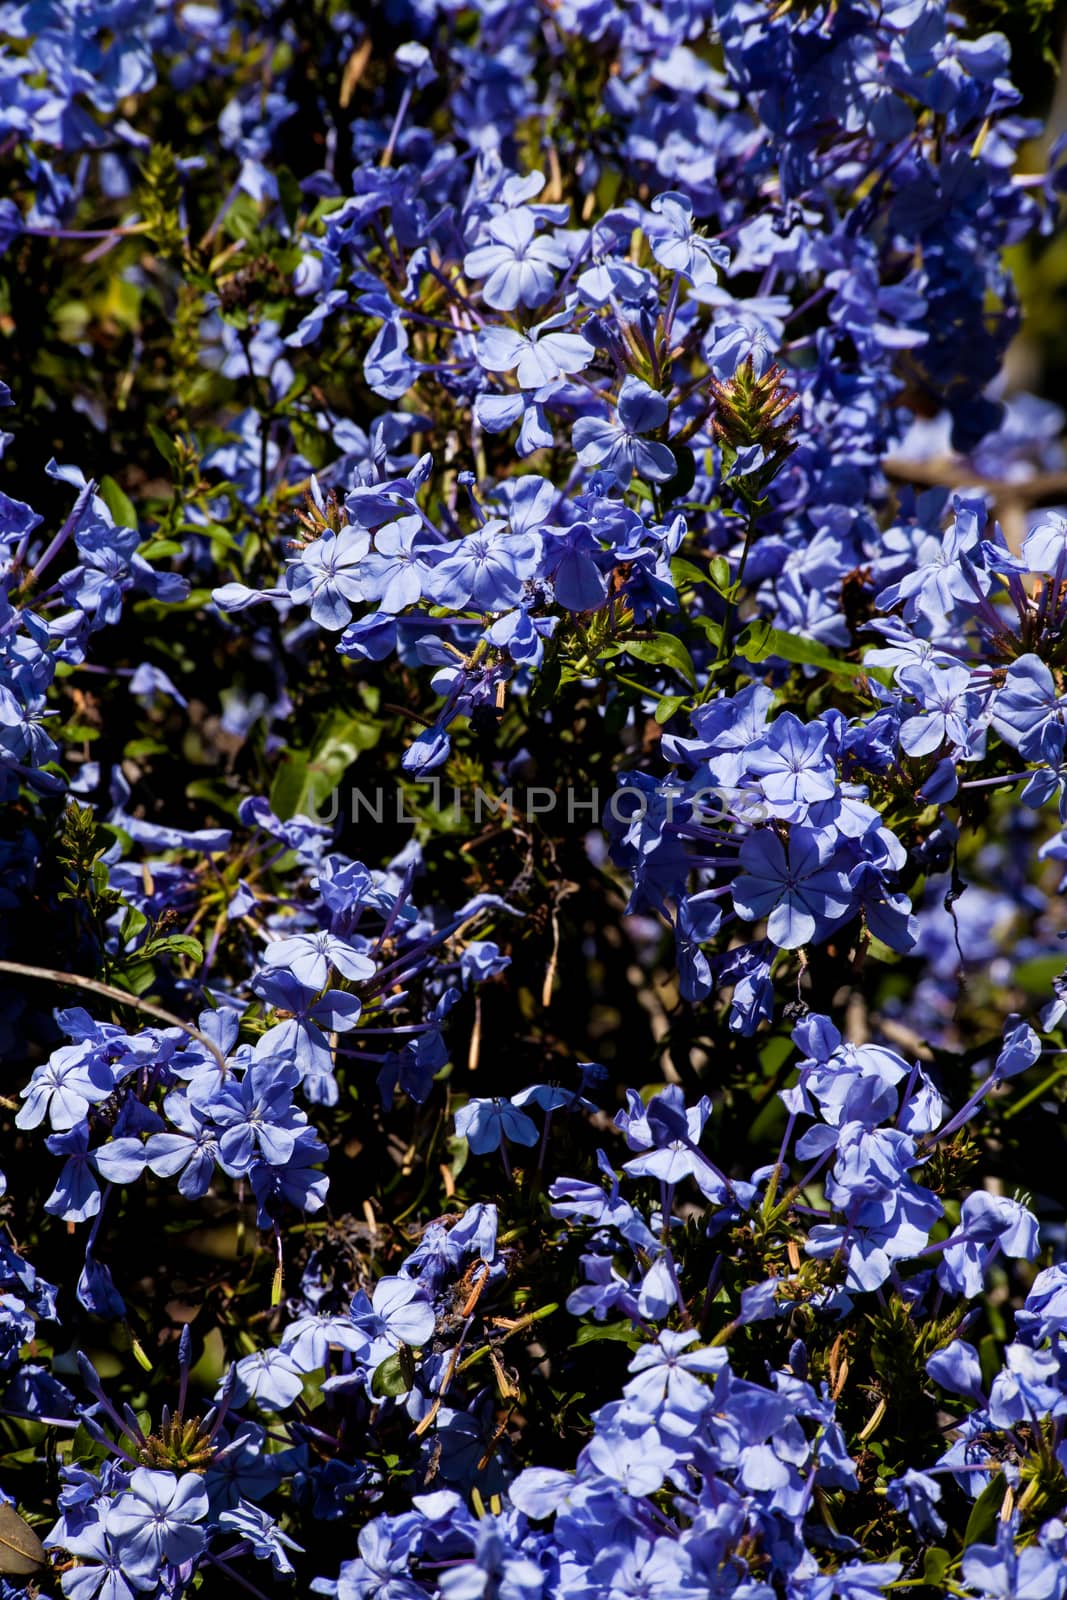 Blue Floral Background by kobus_peche